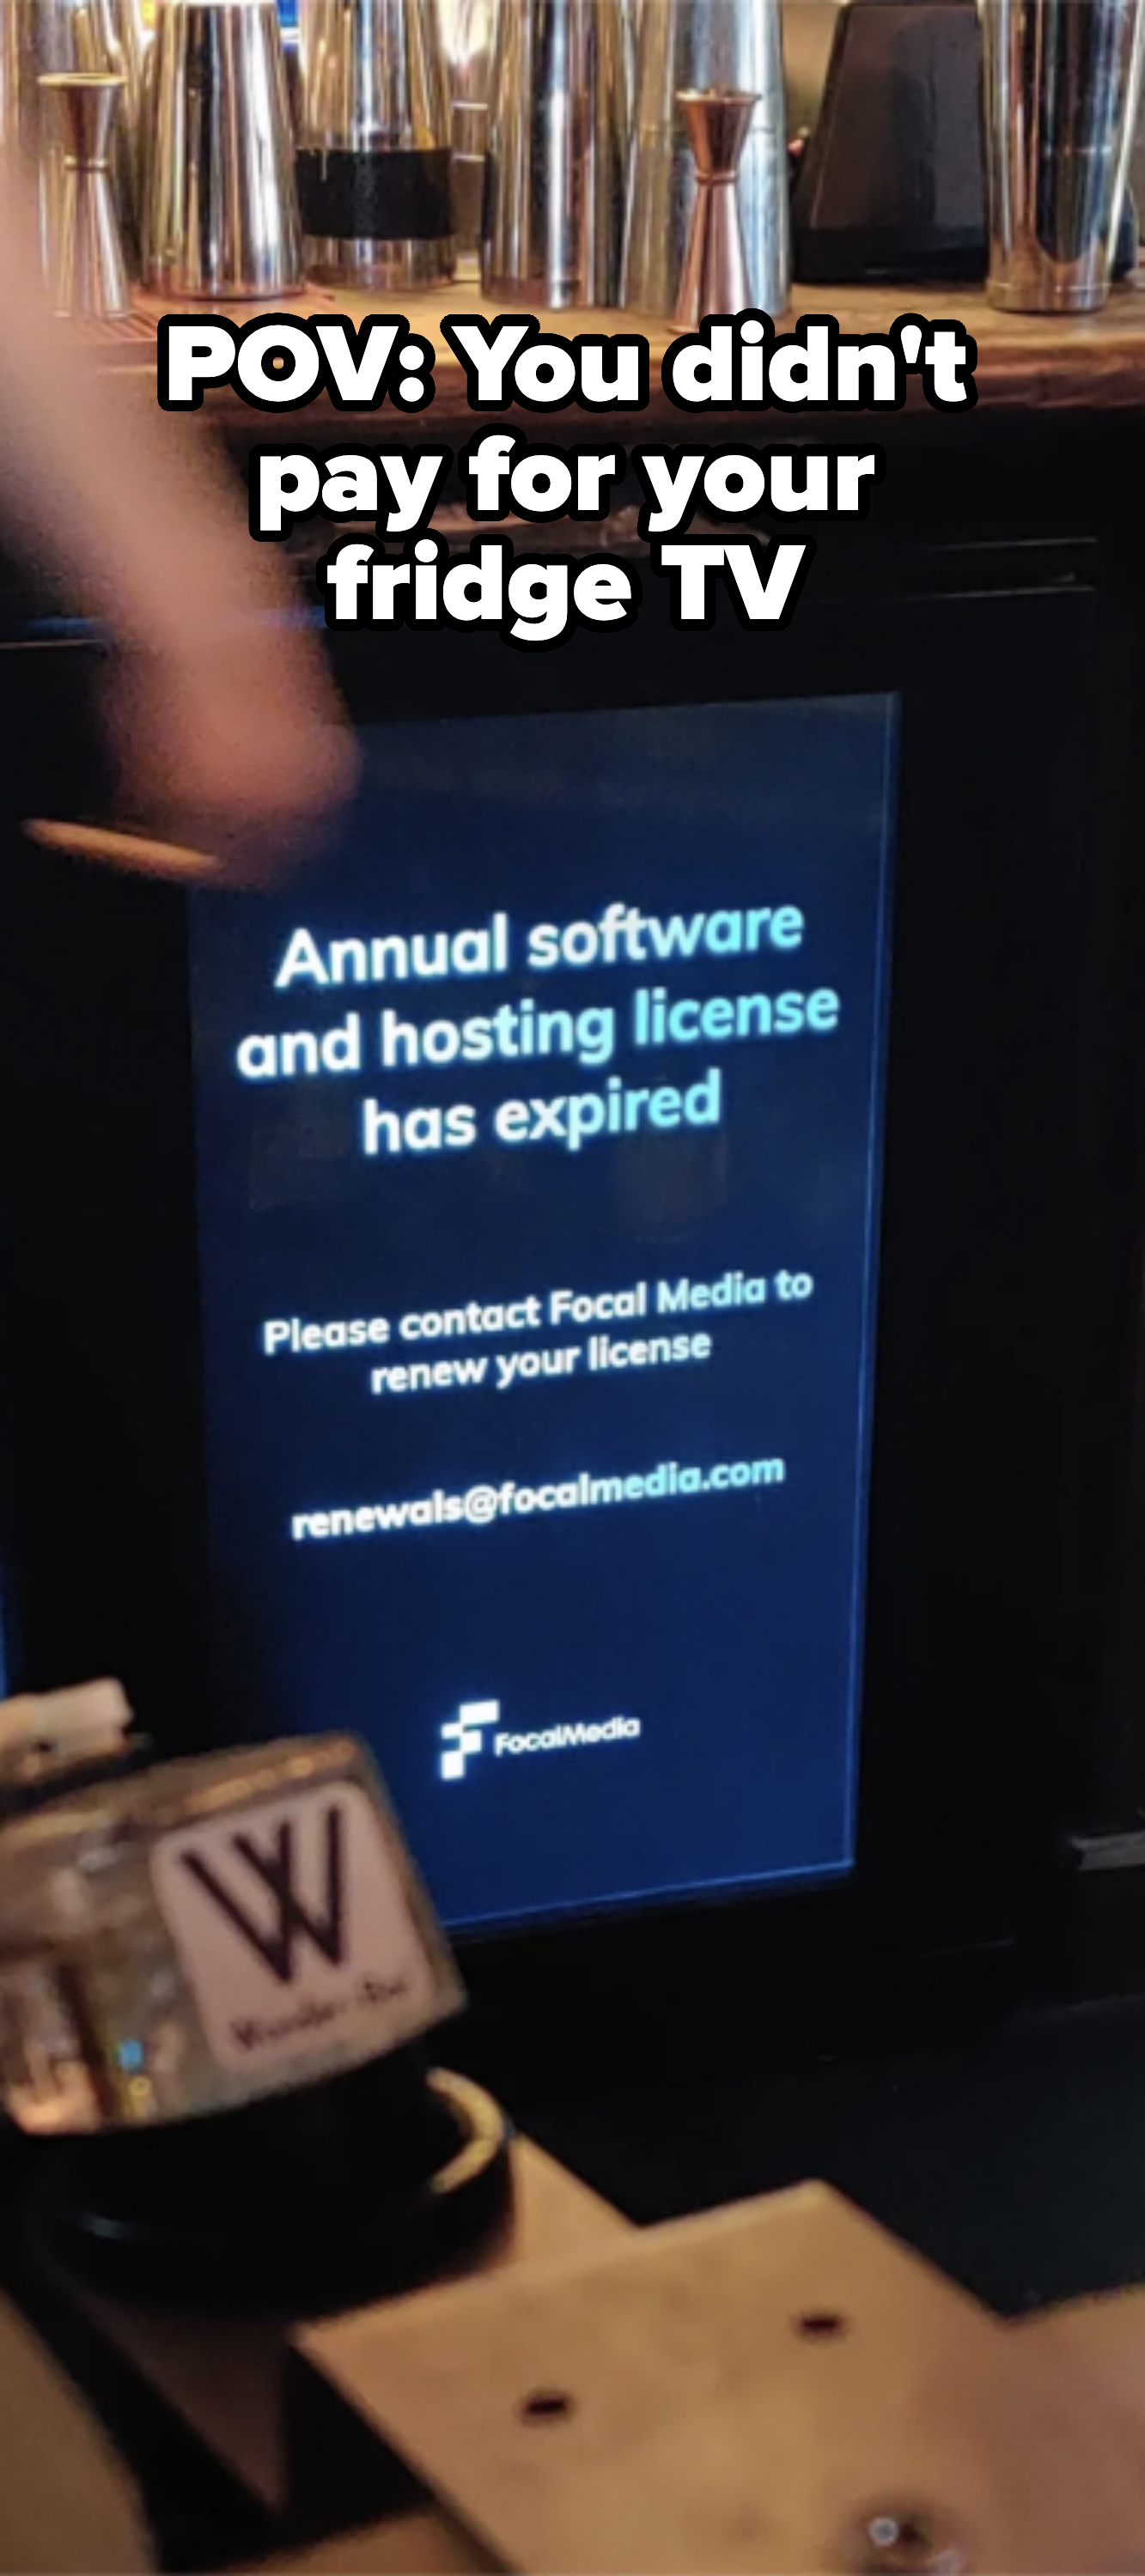 Digital screen reads, &quot;Annual software and hosting license has expired. Please contact Focal Media to renew your license renewals@focalmedia.com.&quot;